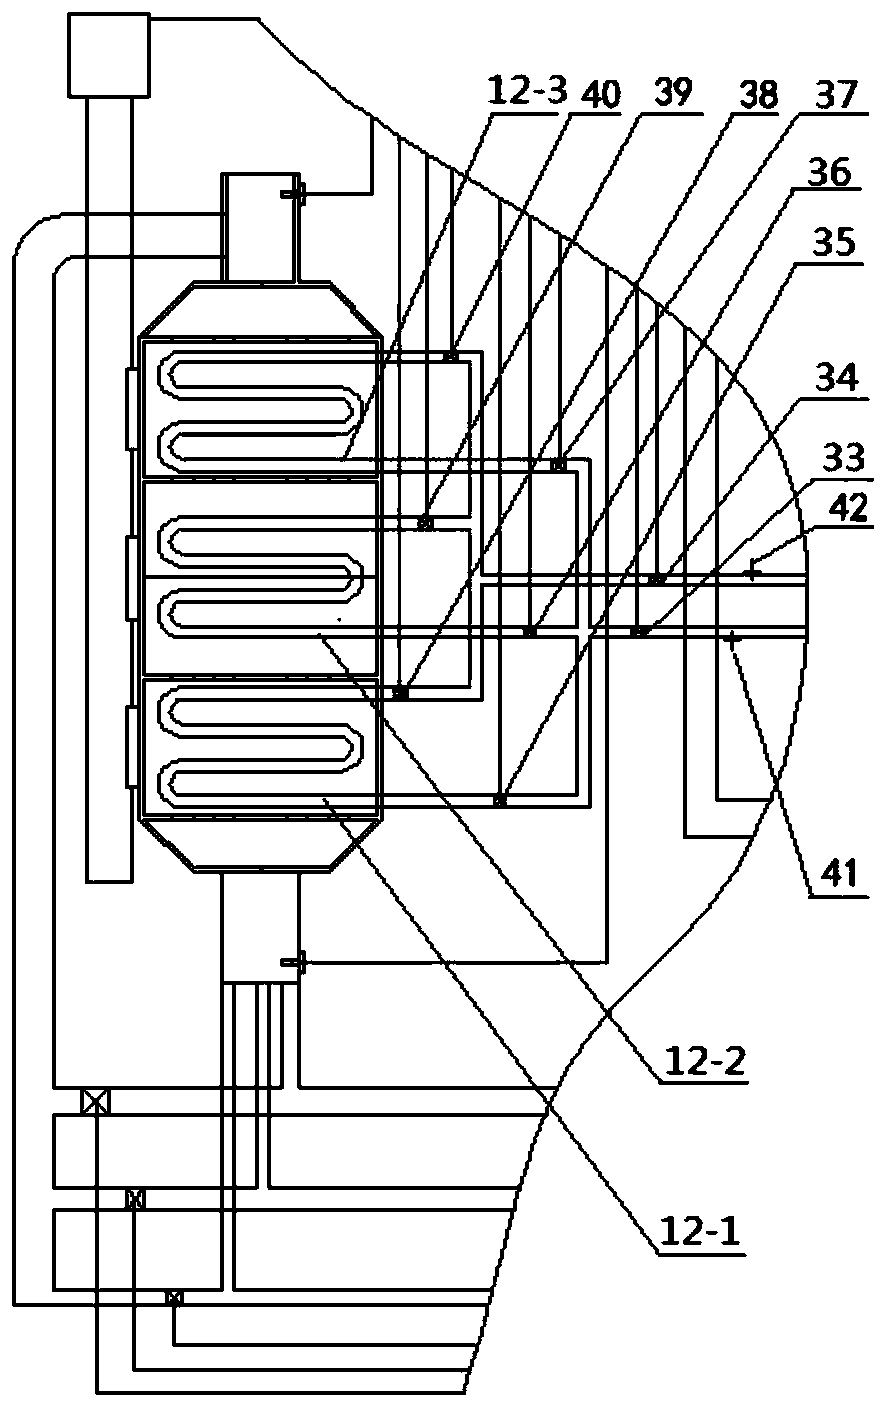 A multi-stage combined recovery device for vehicle engine exhaust energy